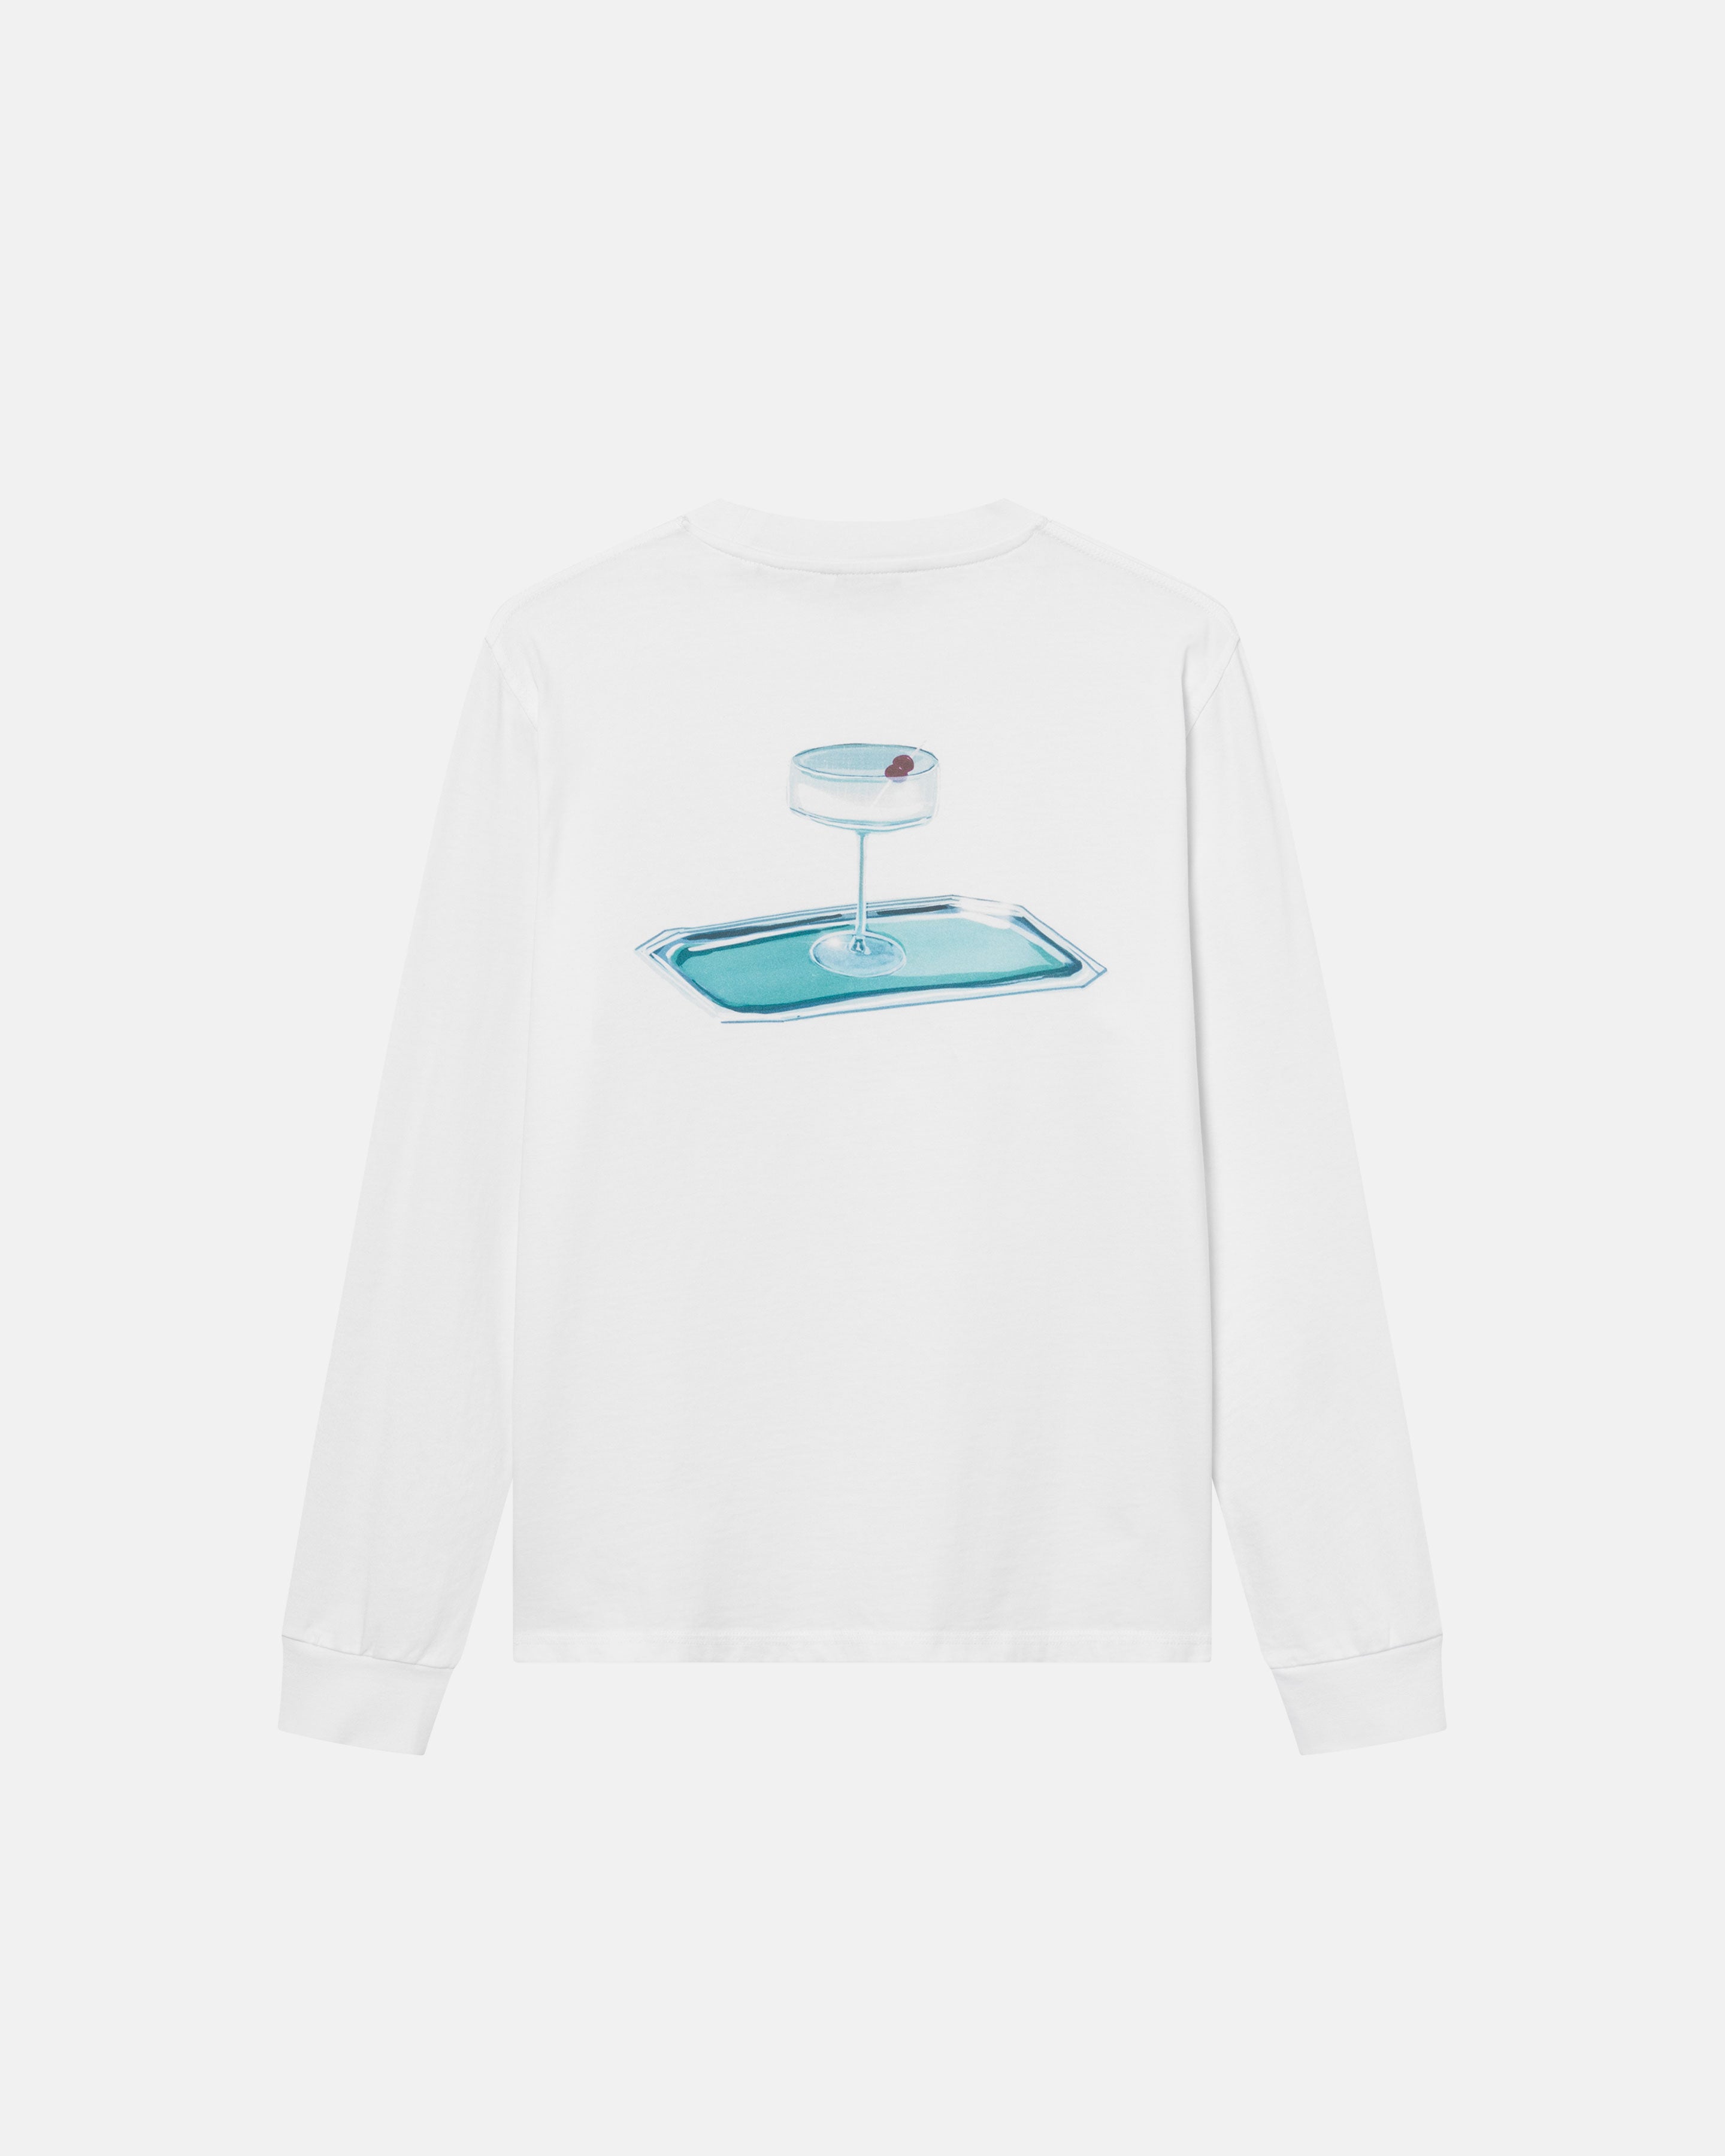 A white long-sleeved t-shirt with a cocktail glass print on its back